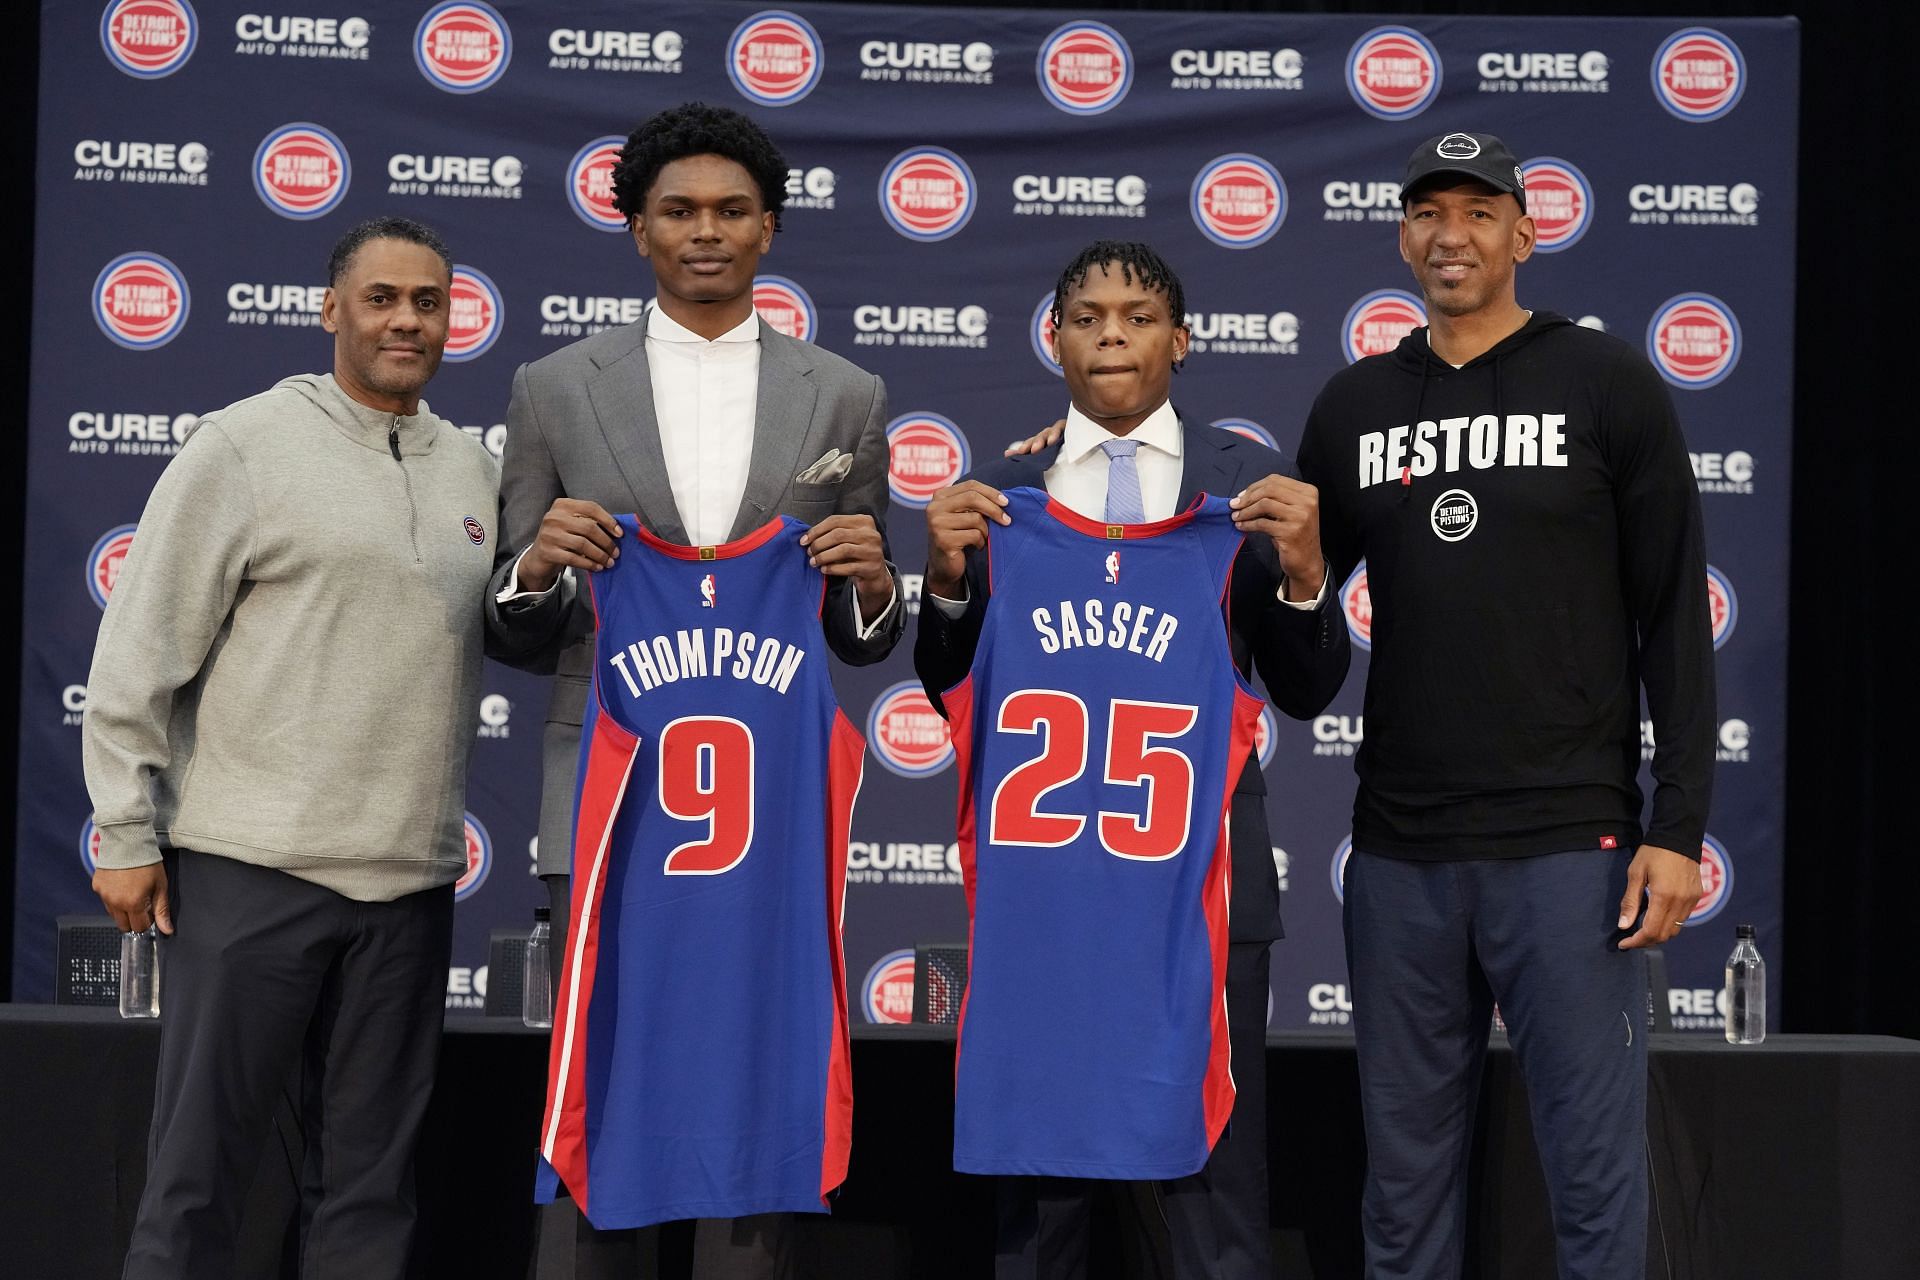 What is the Detroit Pistons' Summer League schedule? Taking a closer look